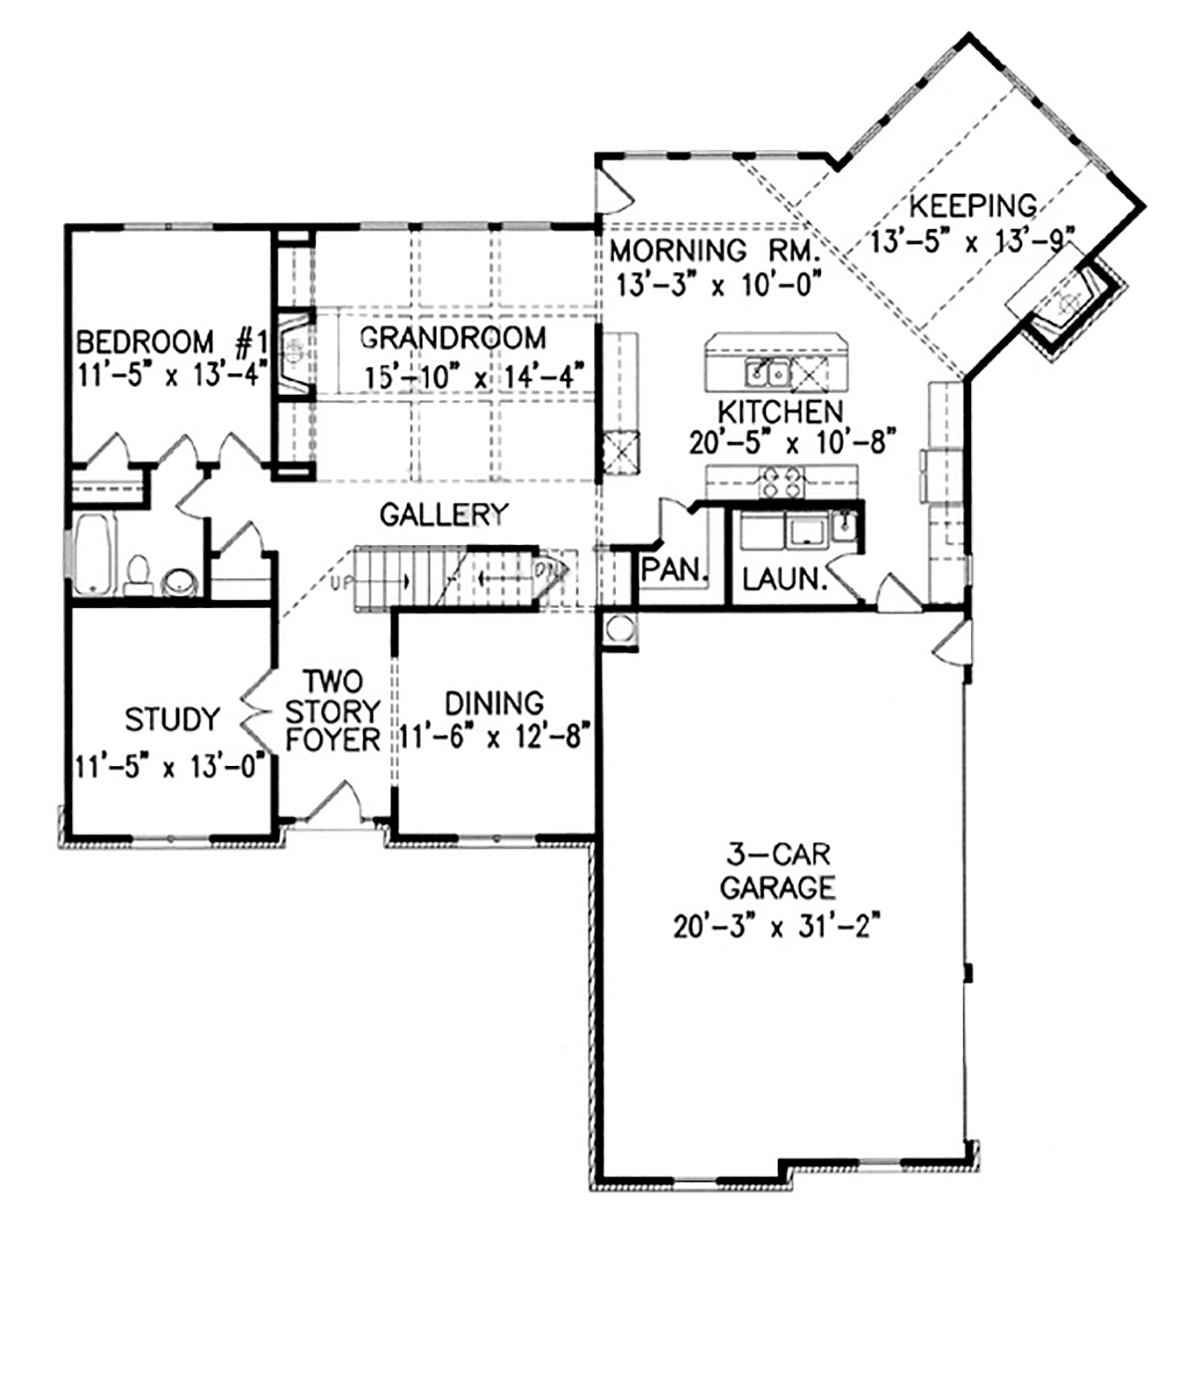 House Plan 97627 Traditional Style With 3338 Sq Ft 5 Bed 4 Bath,Meghan Markle And Prince Harry Baby